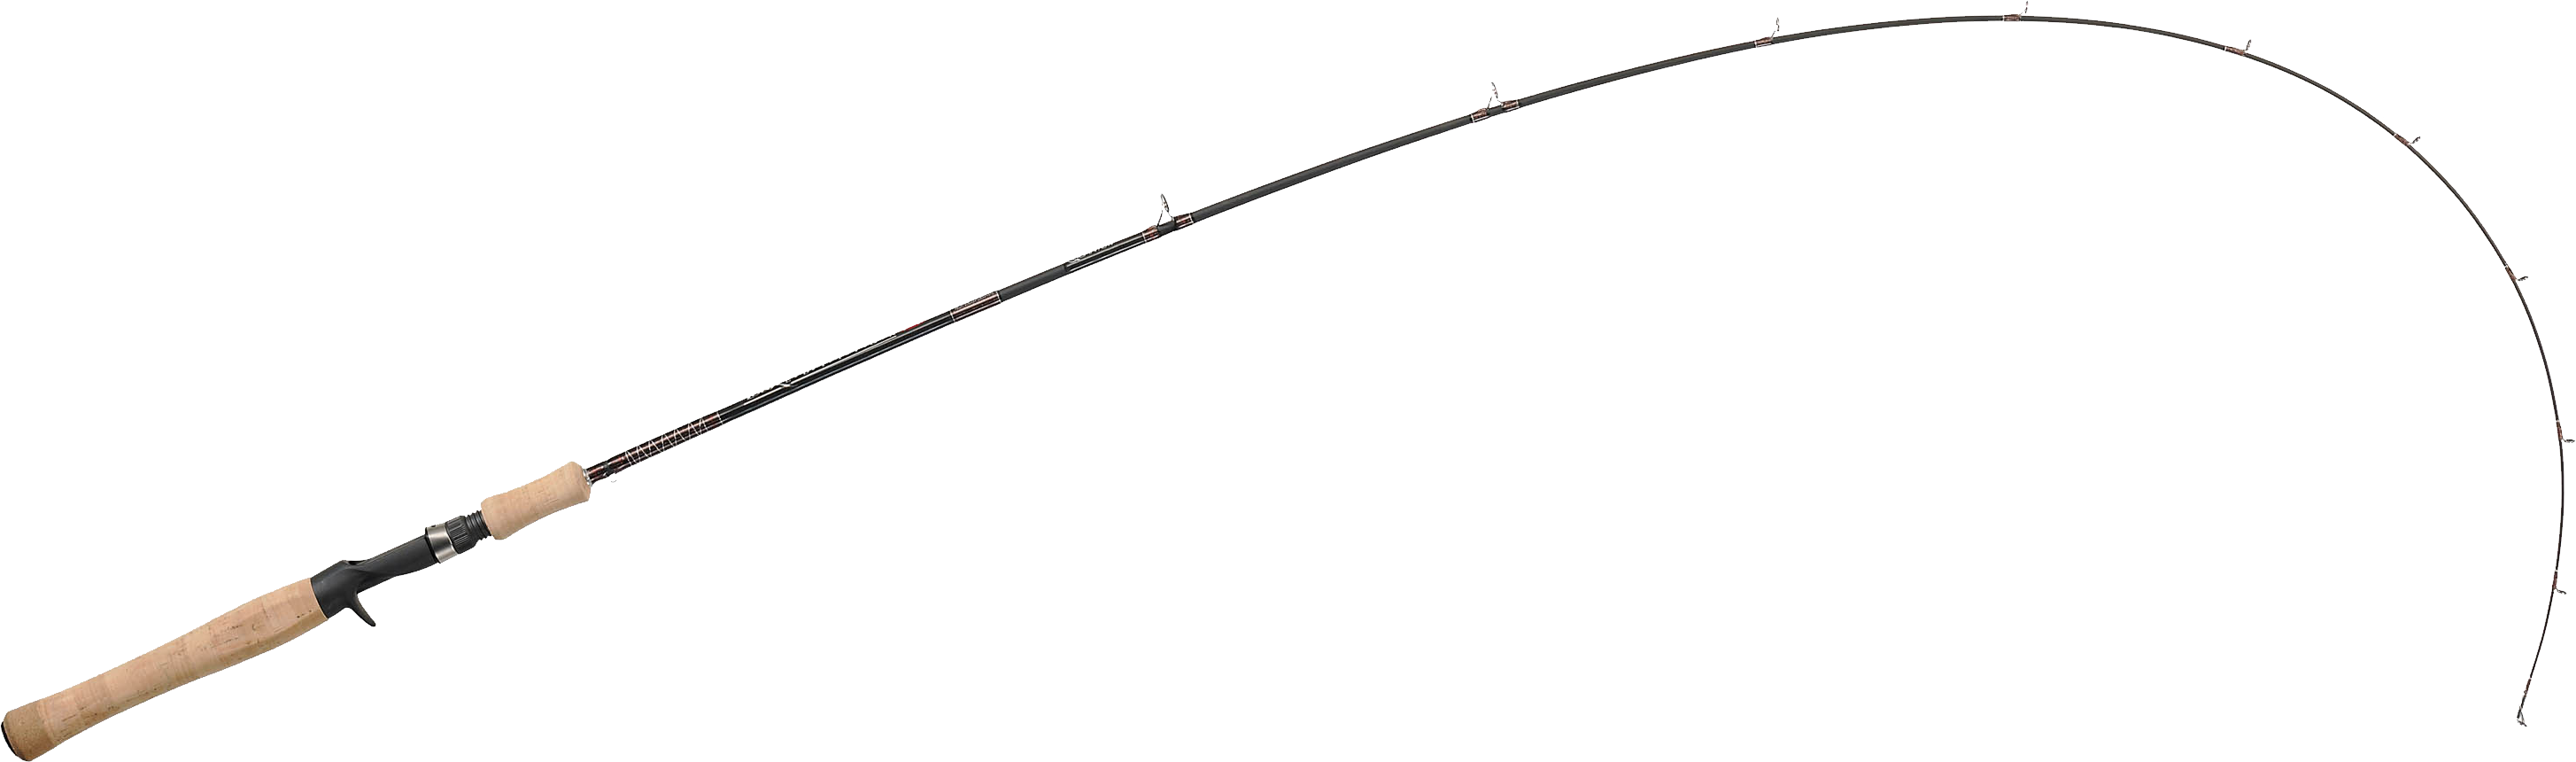 https://www.pngmart.com/files/15/Bamboo-Real-Fishing-Pole-PNG.png